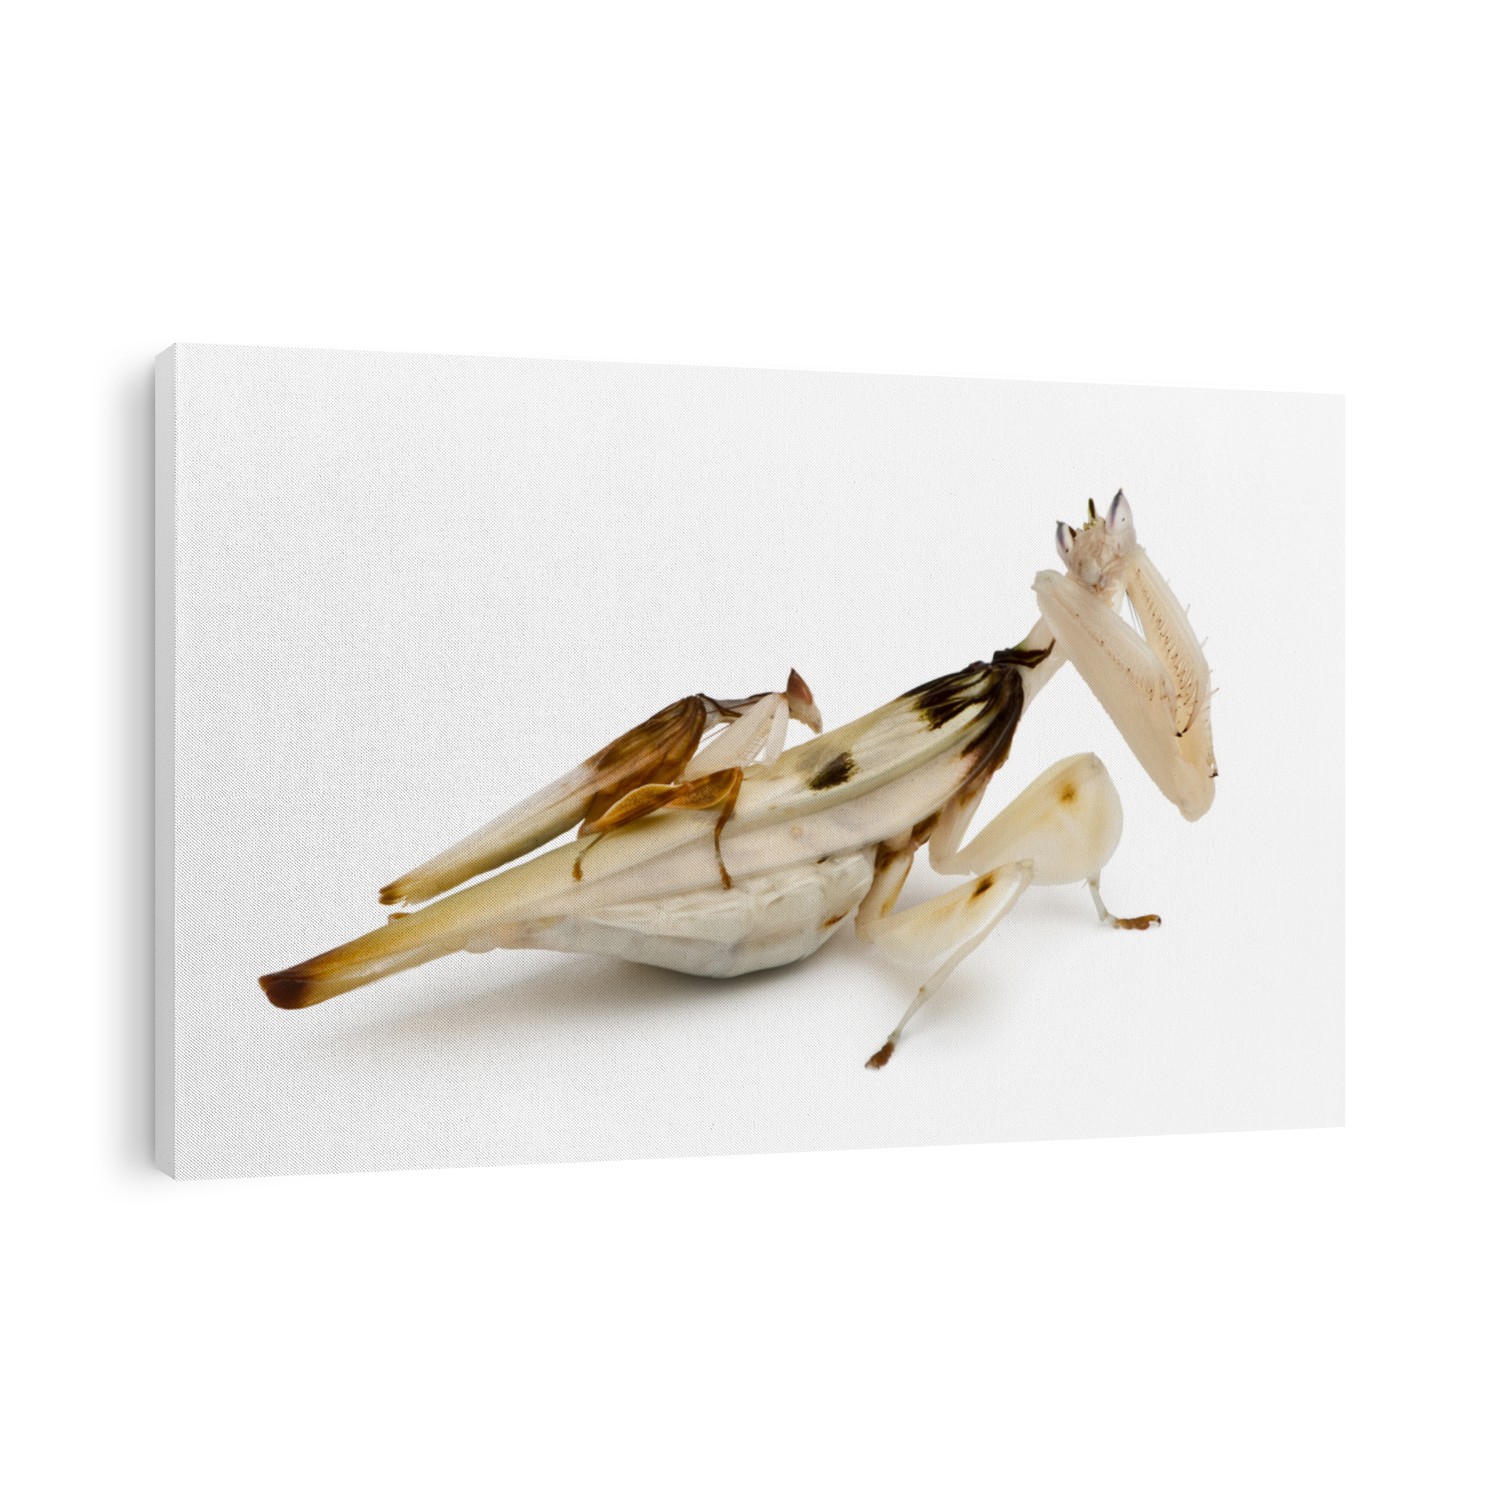 Male and female hymenopus coronatus, Malaysian orchid mantis, in front of white background